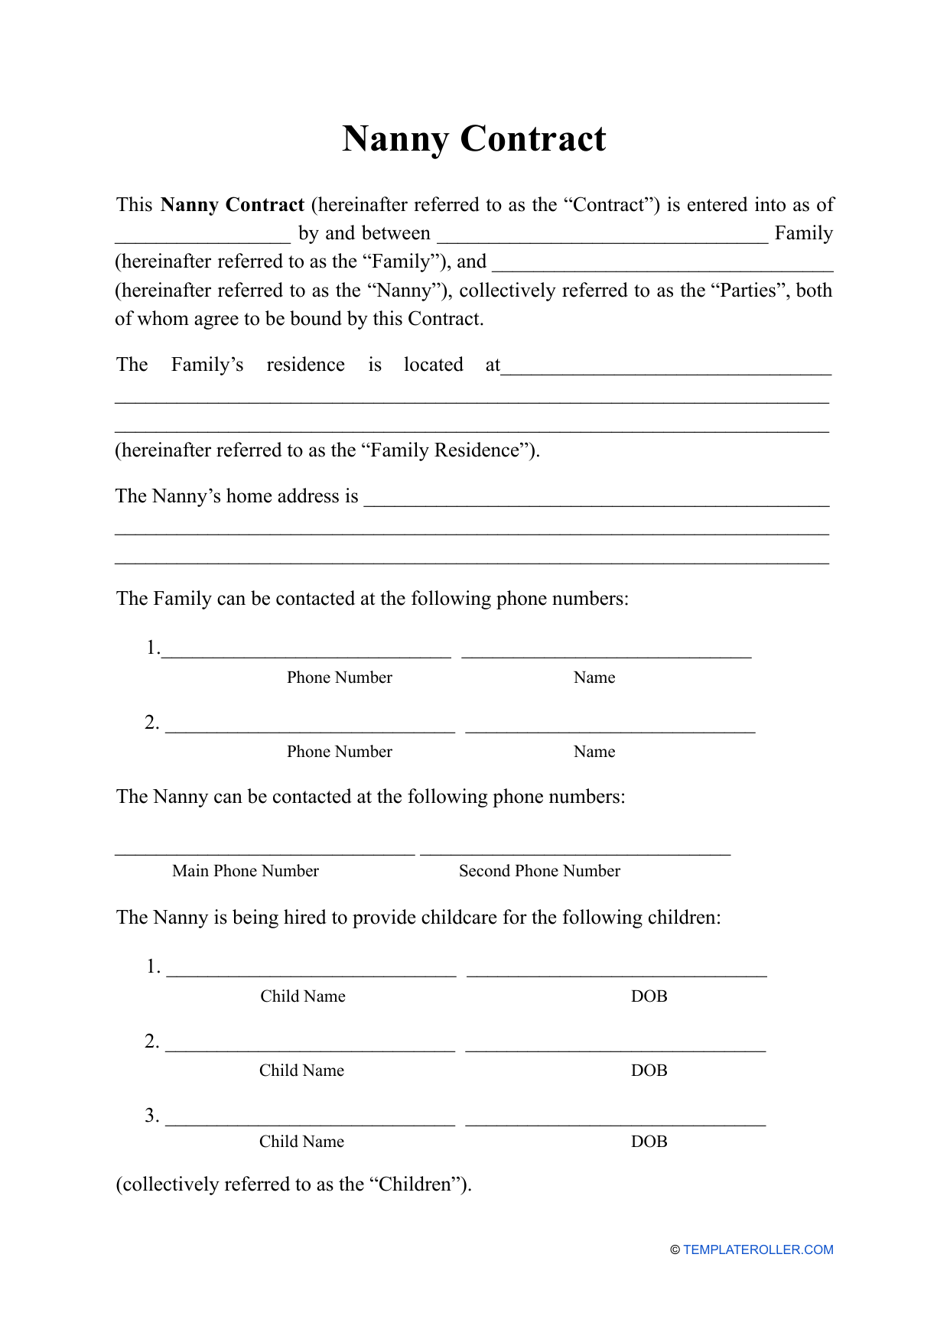 Nanny Contract Template, Page 1